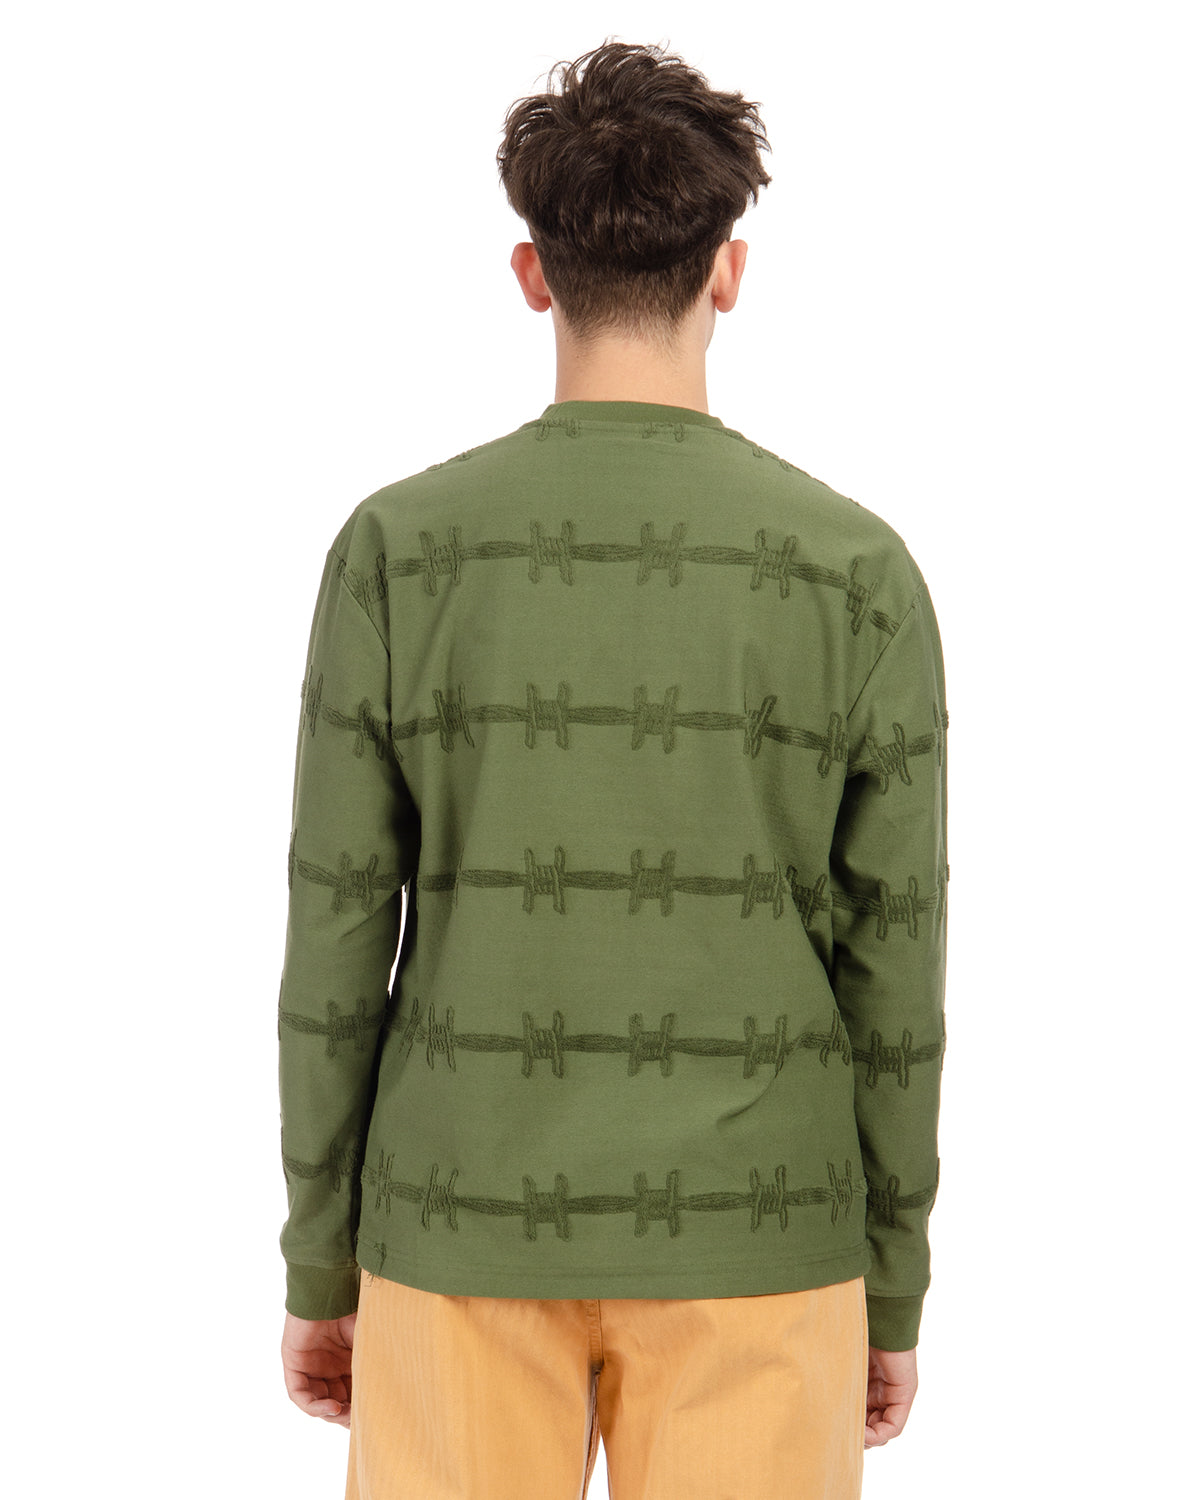 Barbed Wire Burnout Long Sleeve - Olive 4